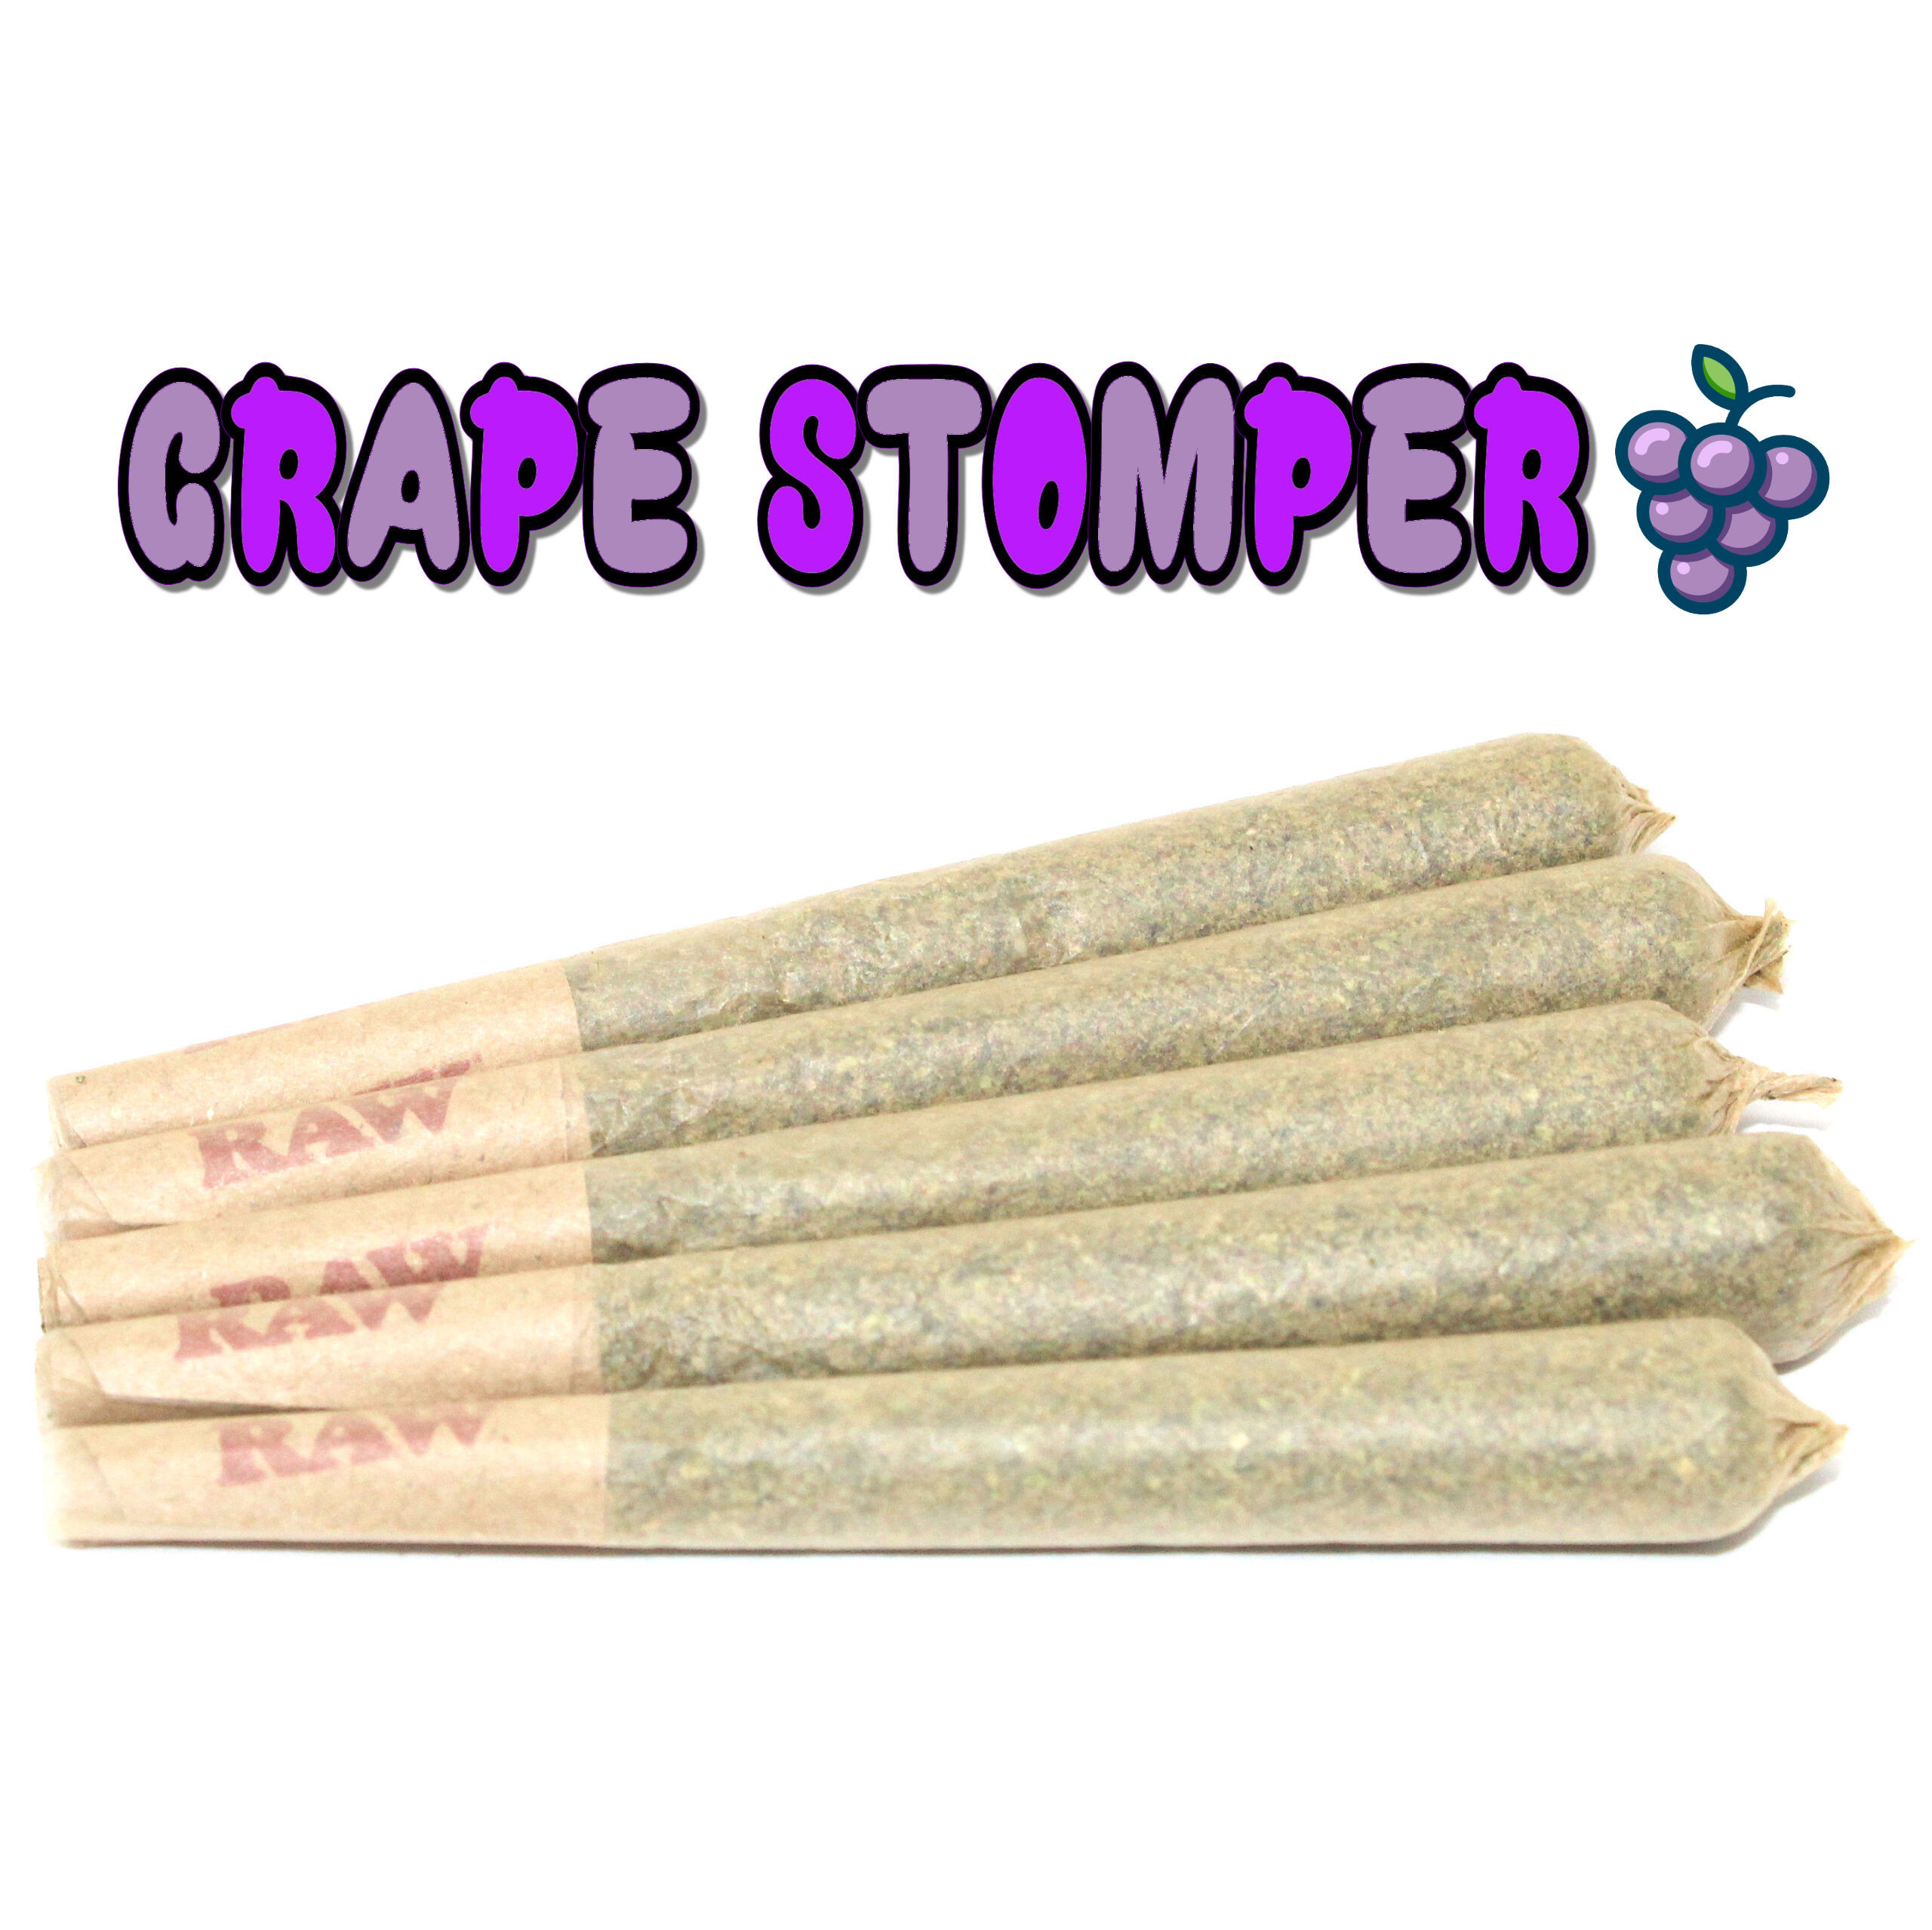 PRE-ROLLED JOINT - 'AAAA' GRAPE STOMPER (1G)